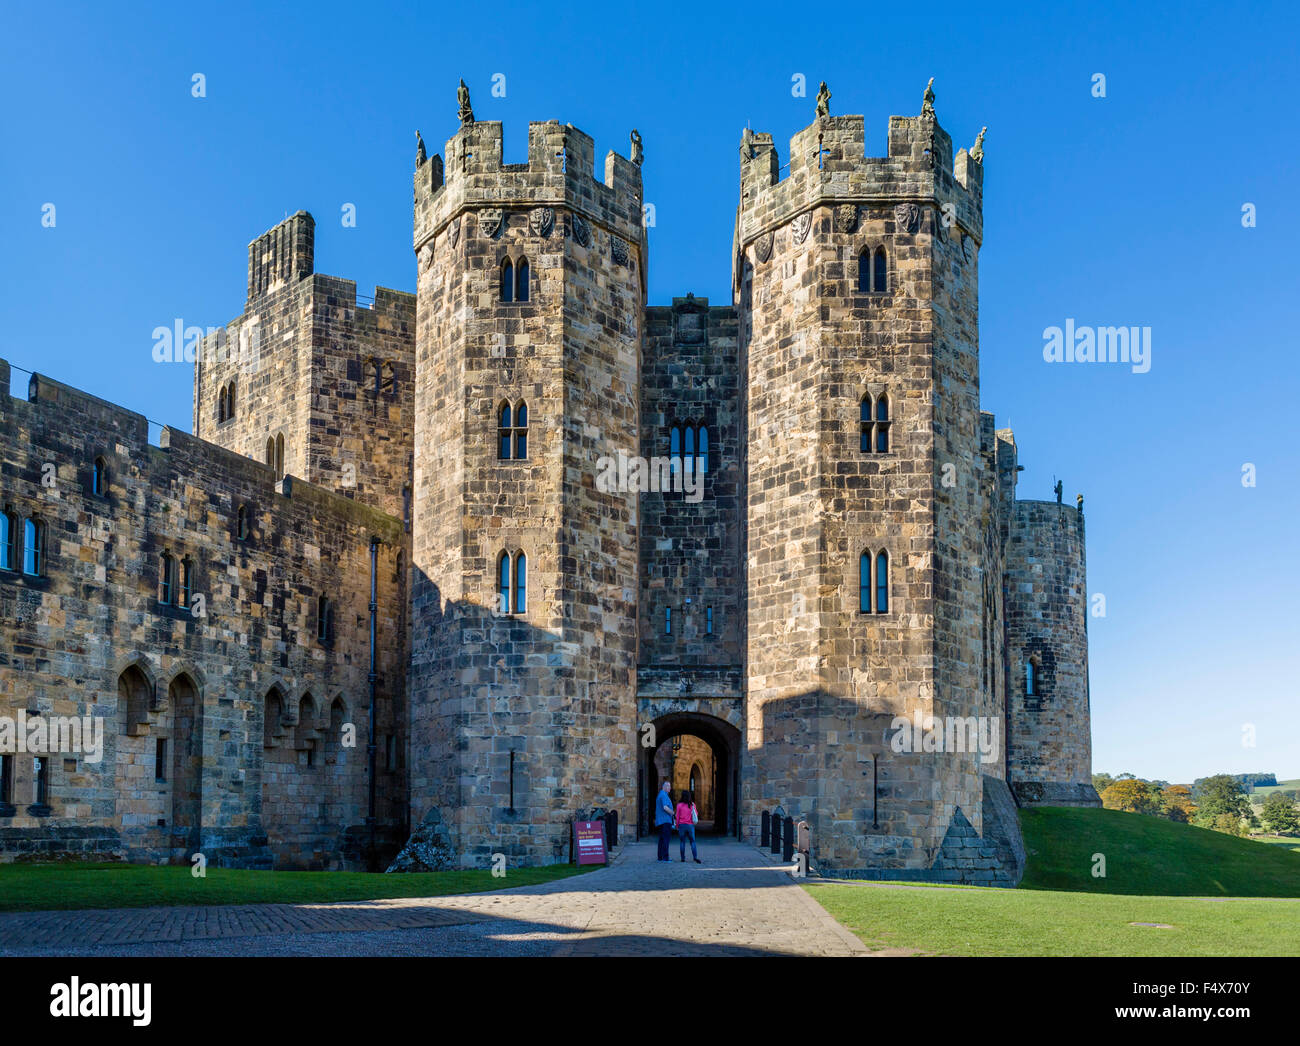 Alnwick Castle. Entrance to the State Rooms from the Inner Bailey, Alnwick,Northumberland, UK Stock Photo